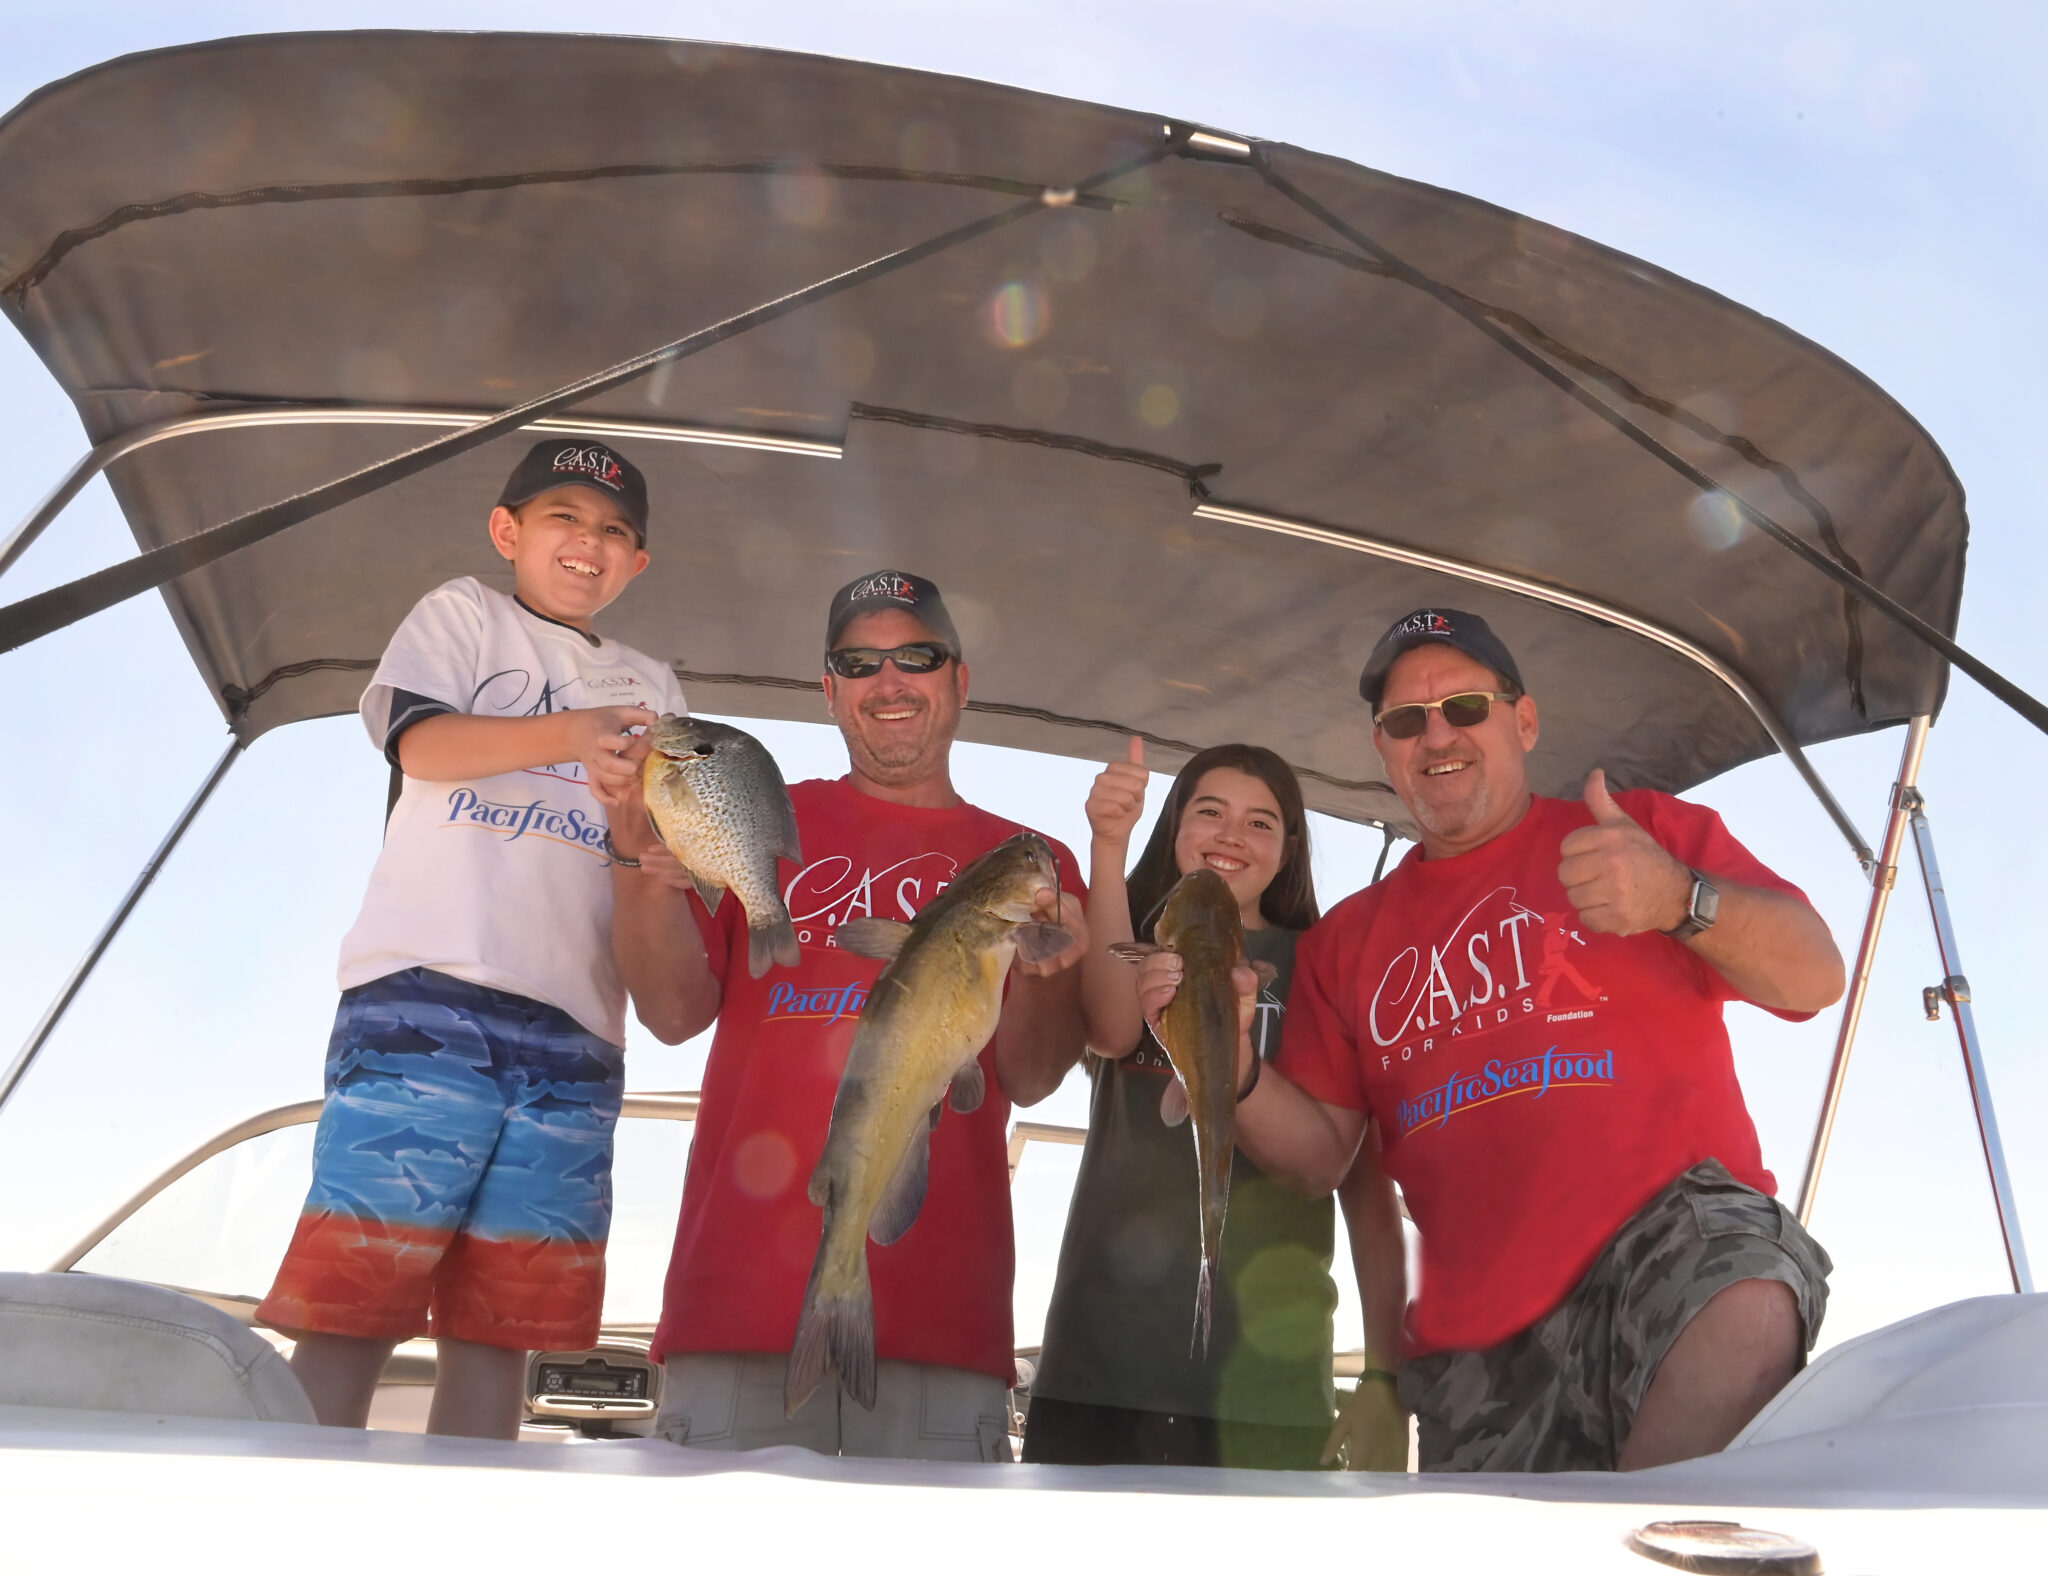 C.A.S.T. for Kids - Lake Pleasant presented by Pacific Seafood